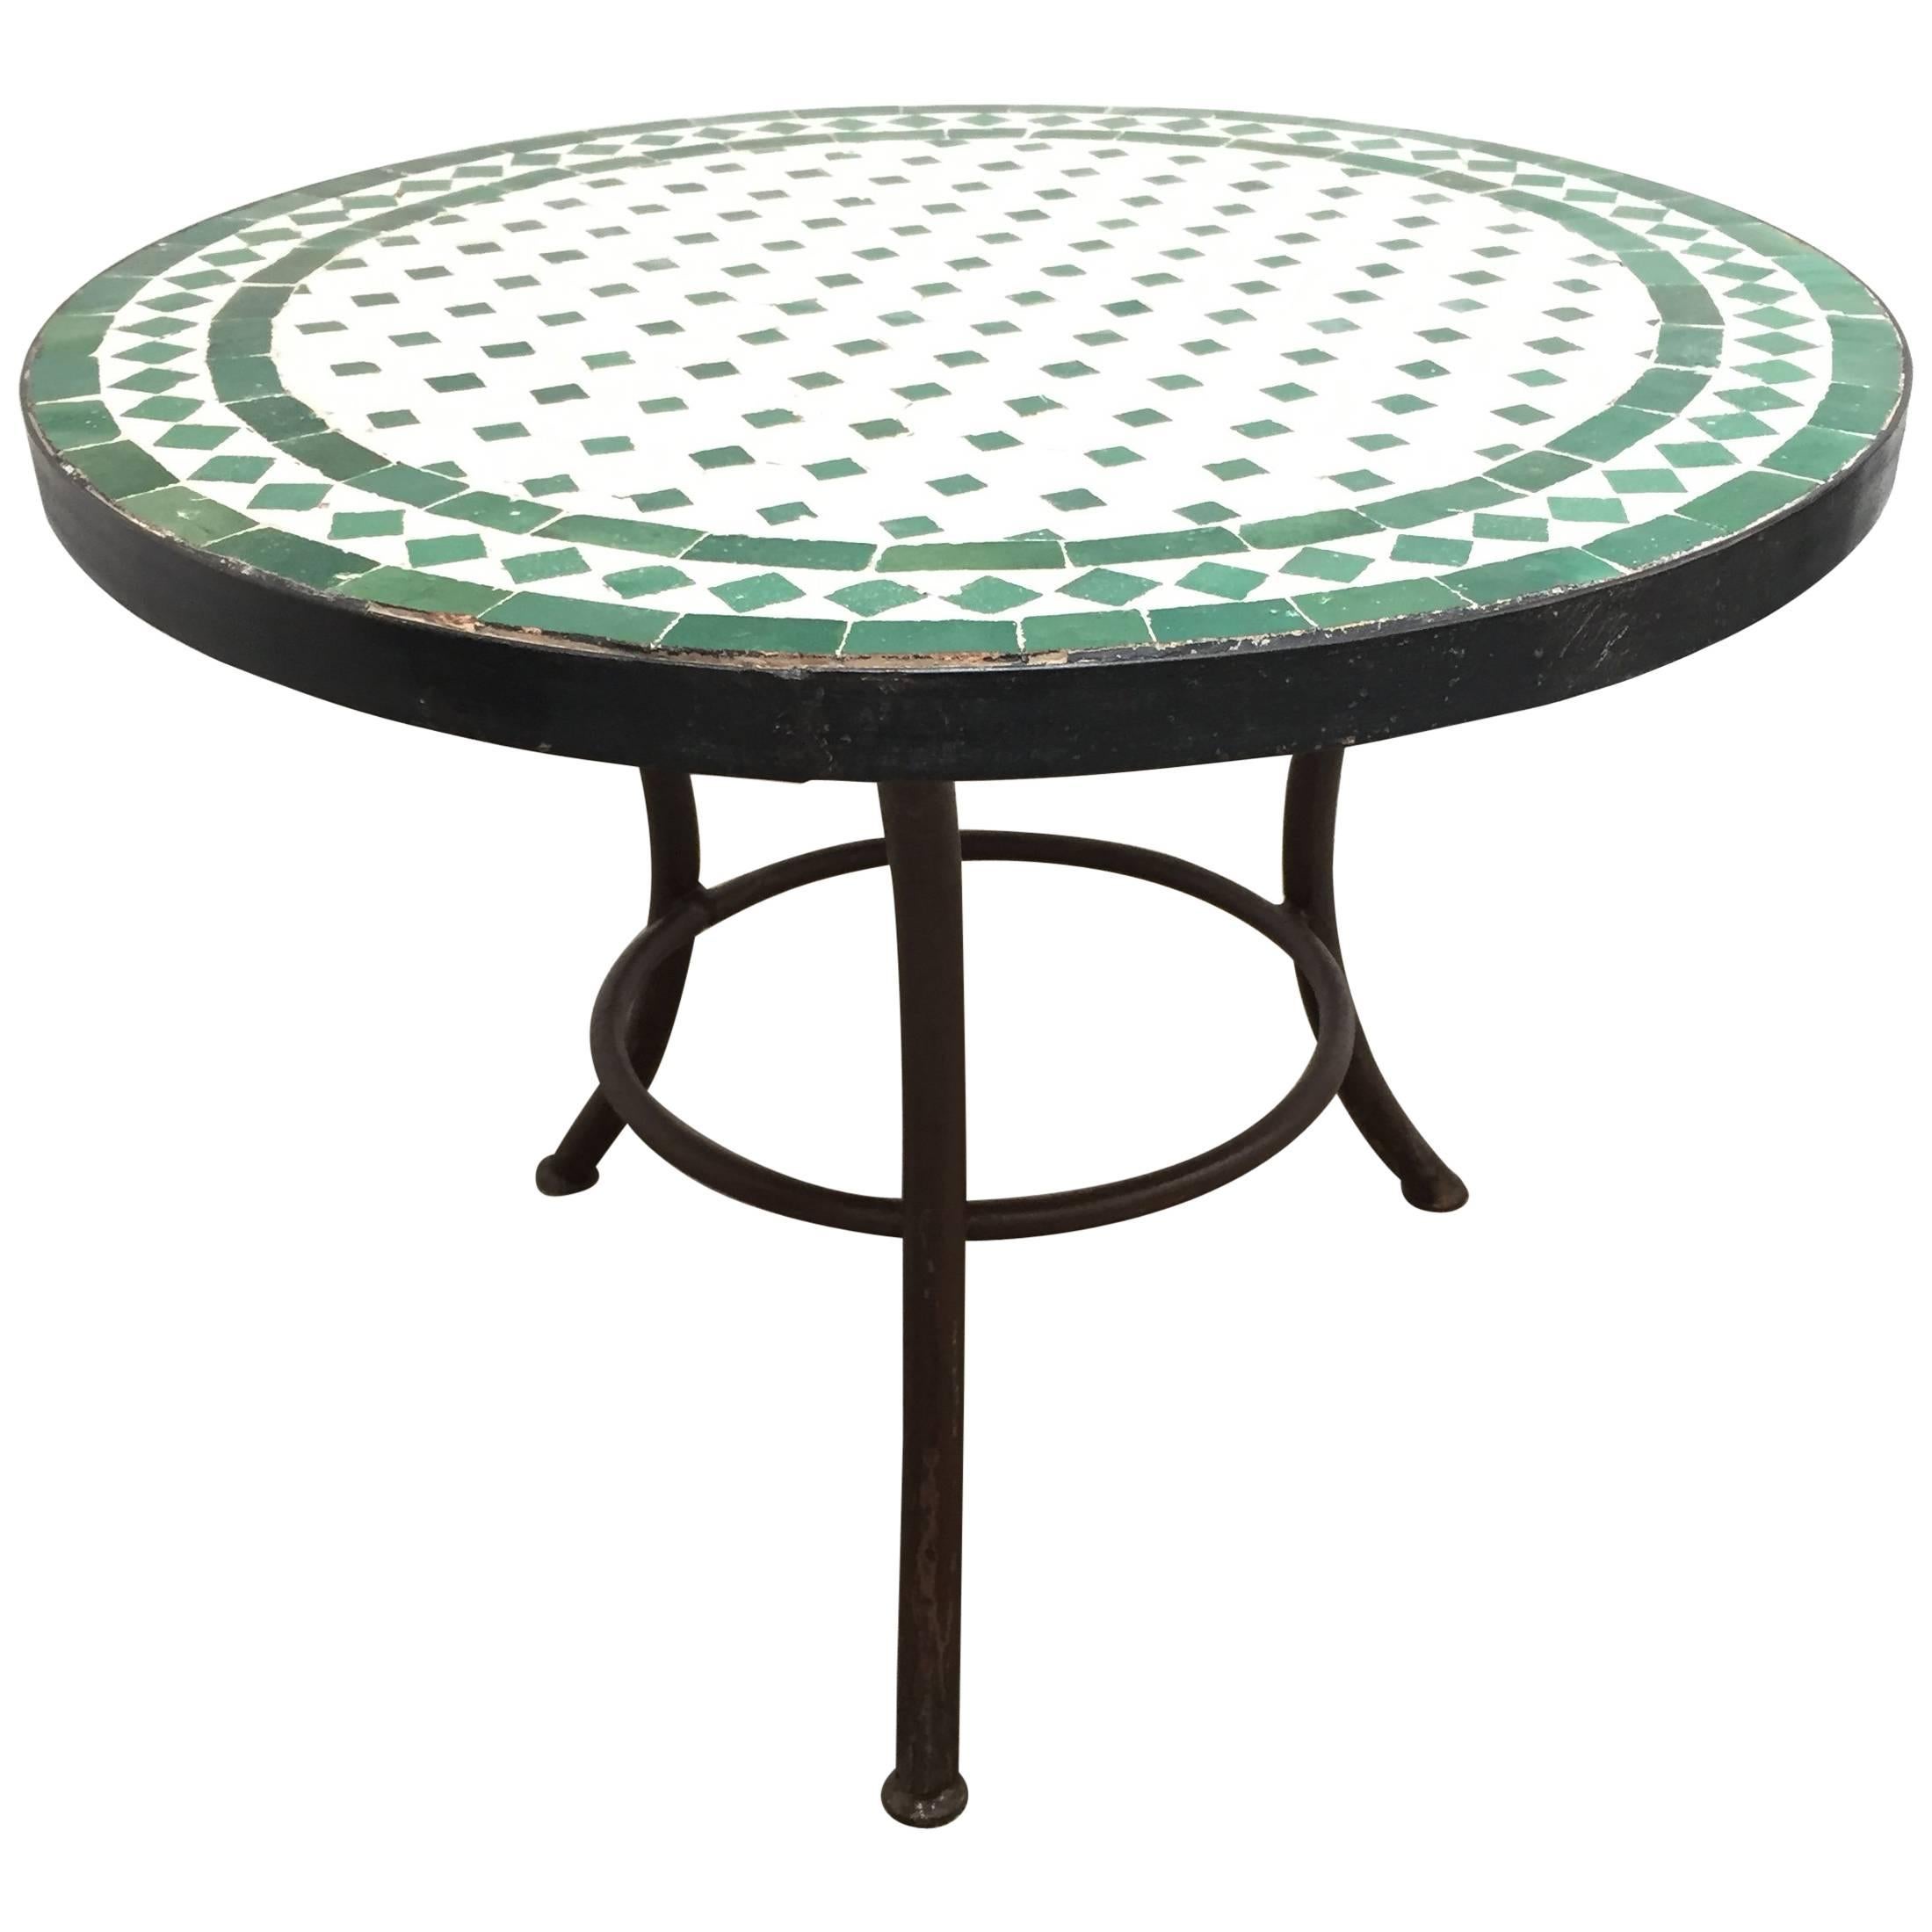 Moroccan Mosaic Tile Outdoor Side Table on Low Iron Base Green and White